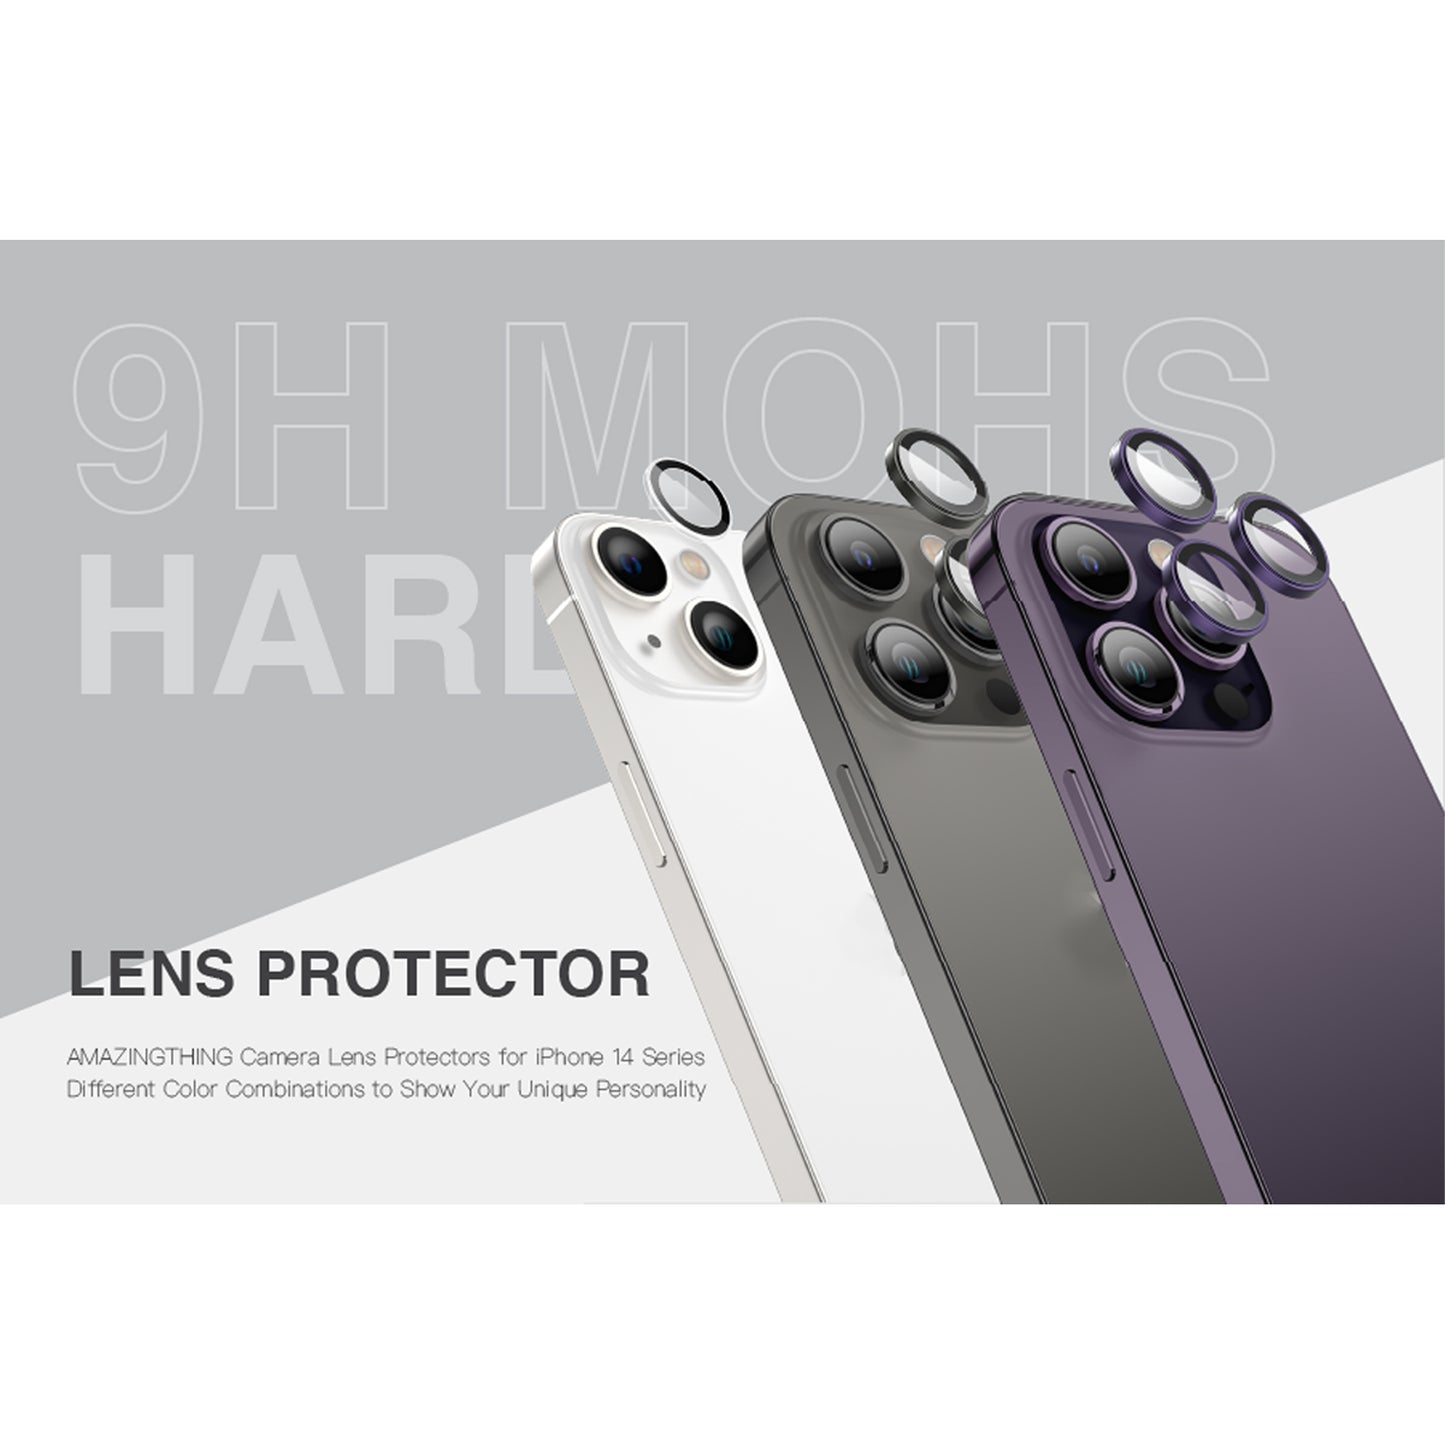 Amazingthing Lens Protector for iPhone 14 - 14 Plus - Purple (Barcode: 4892878076050 )